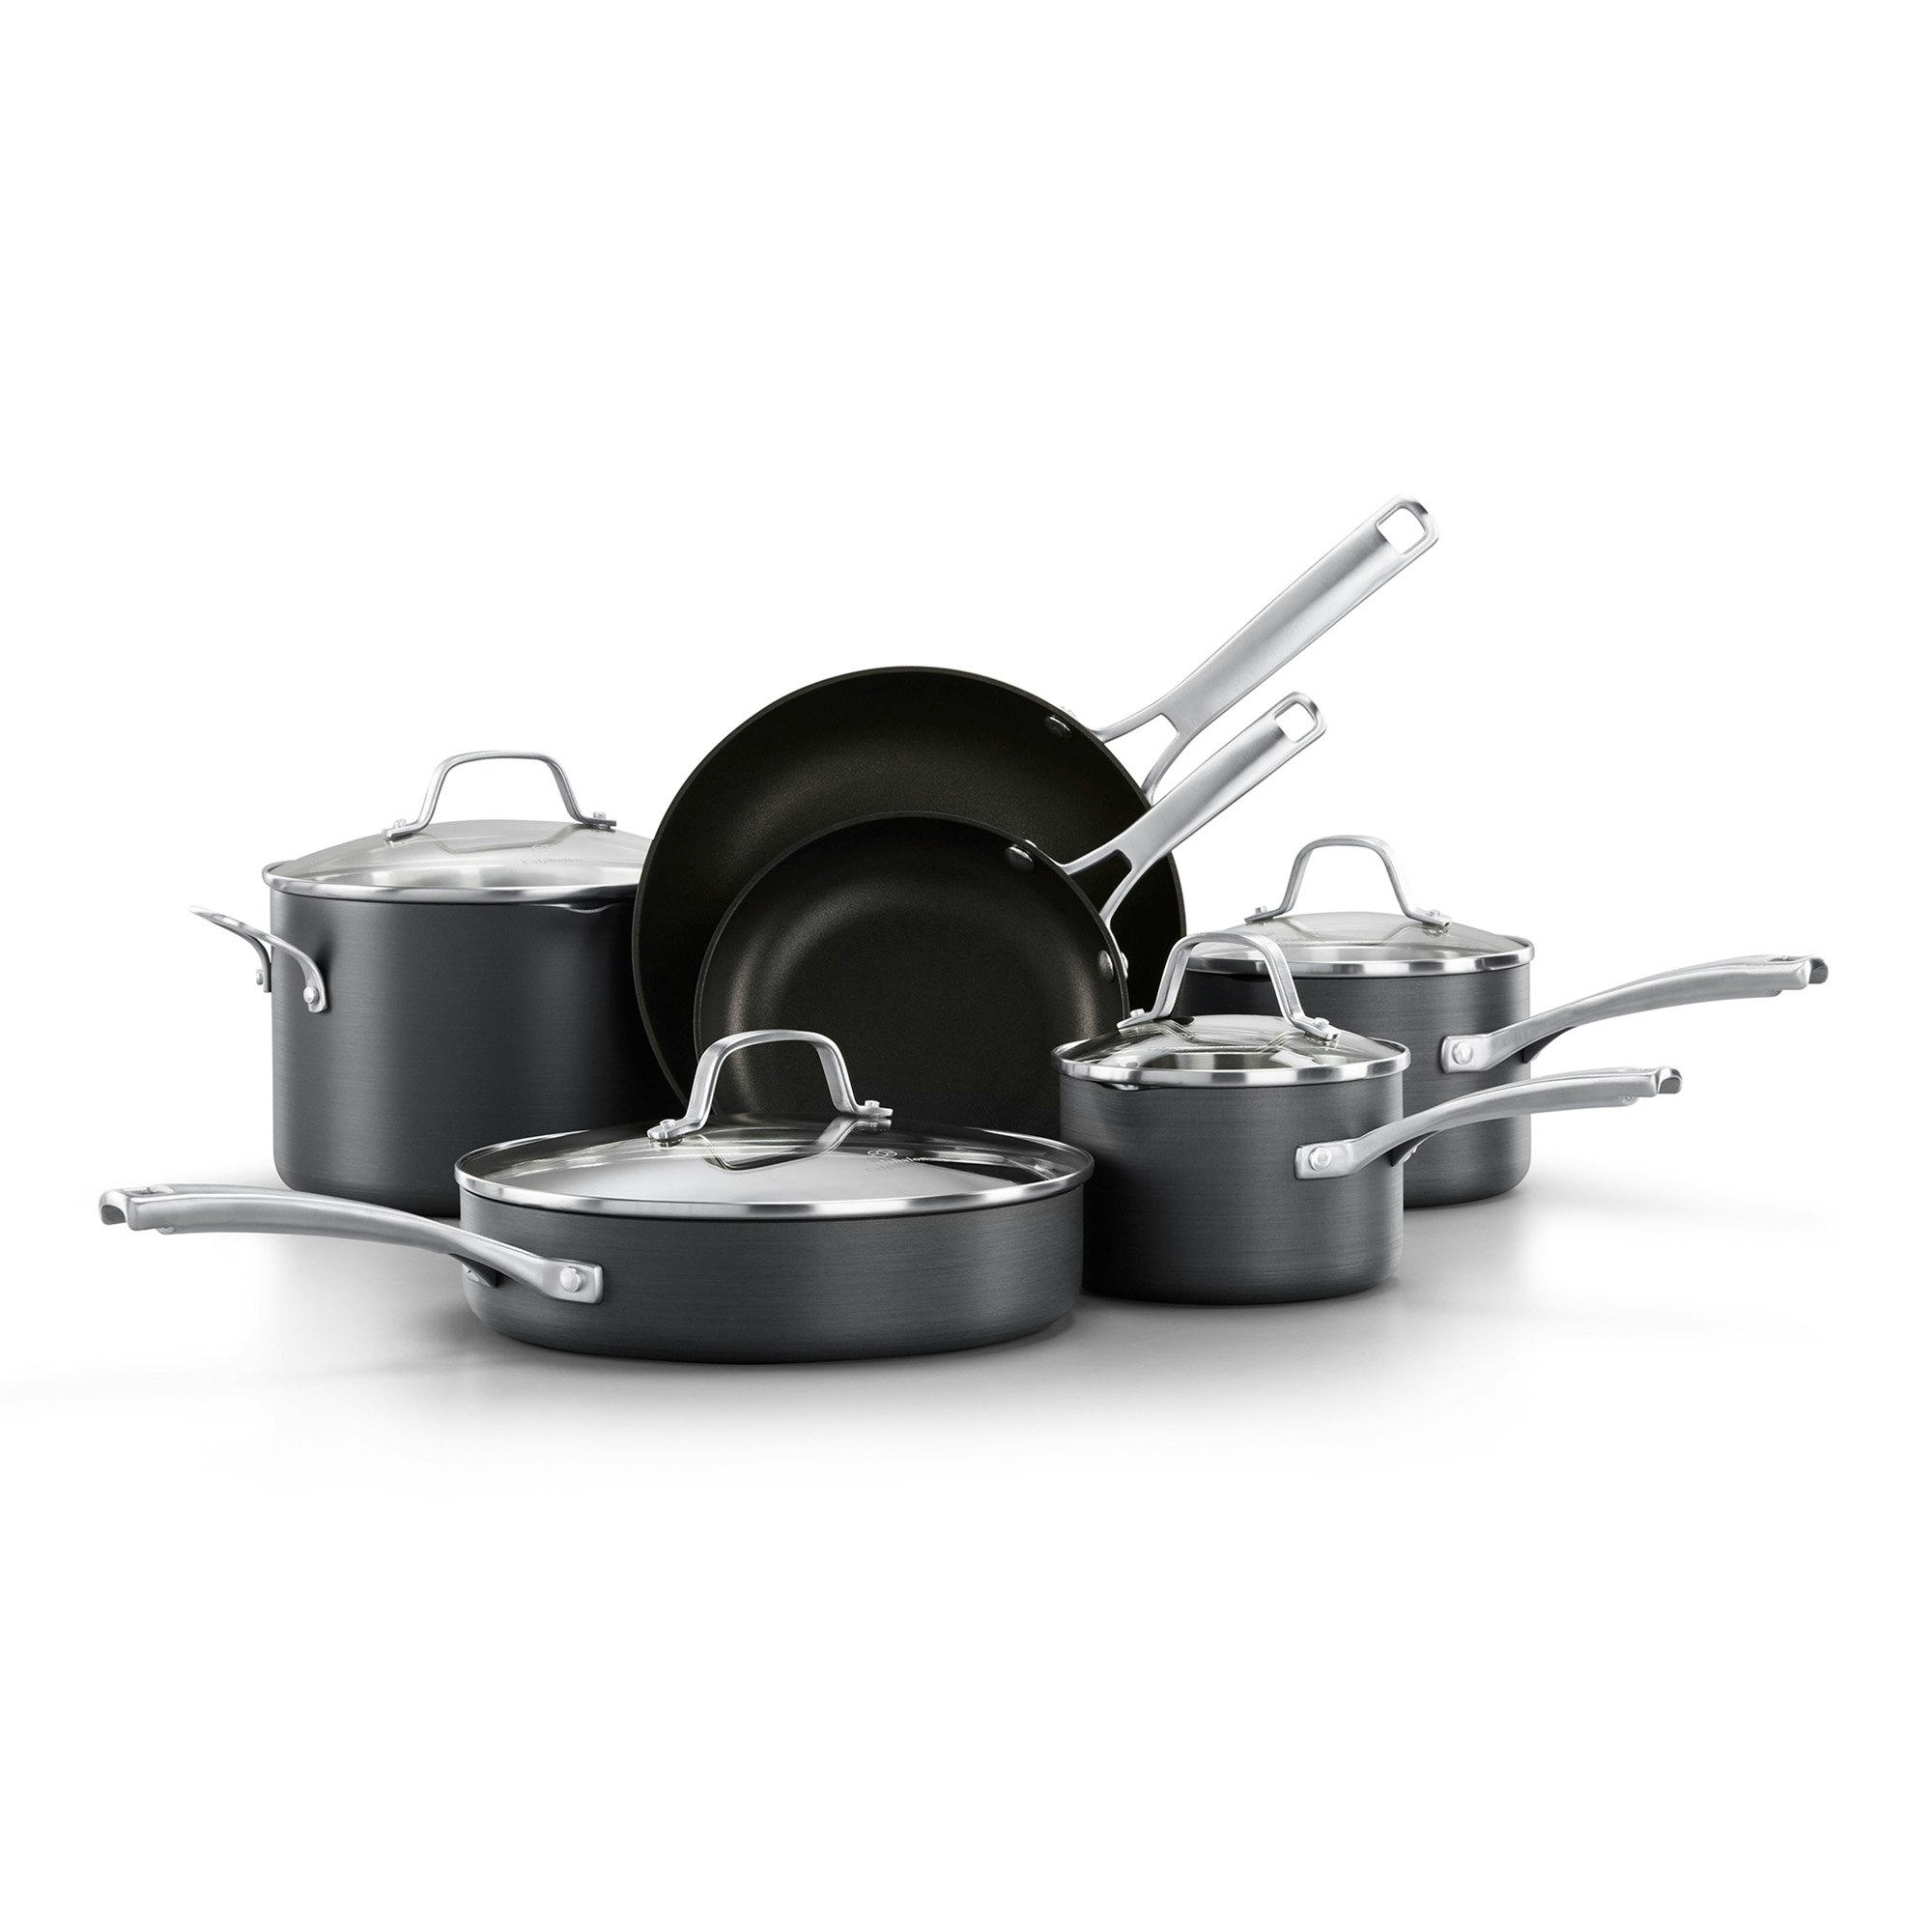 is hard anodized cookware safe